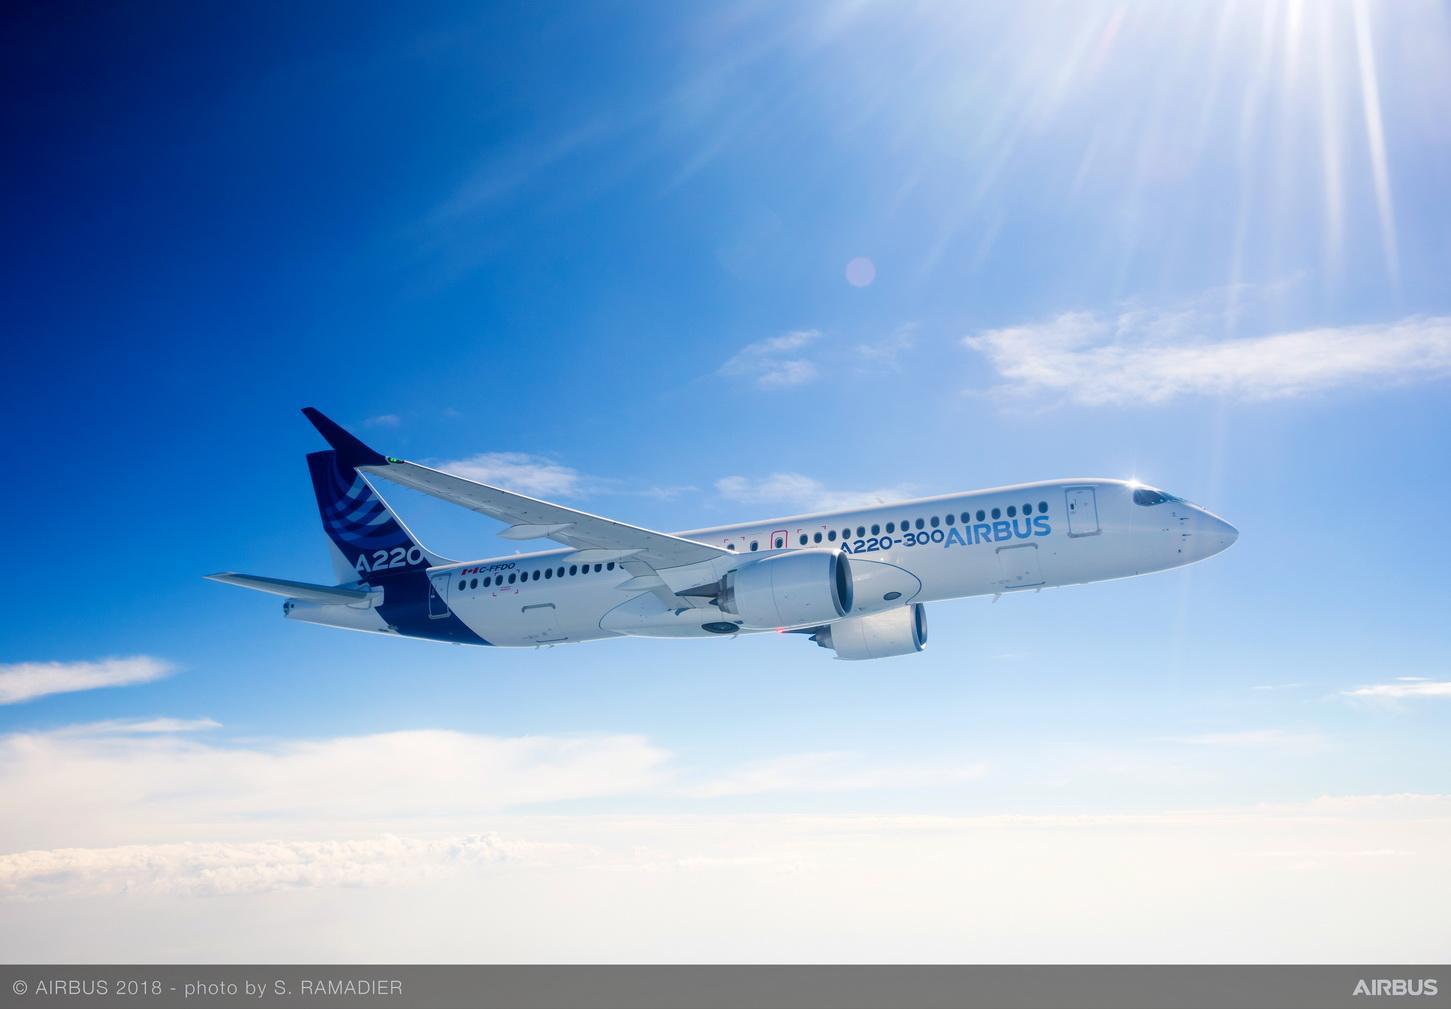 Airbus Bags Order for 20 A220s